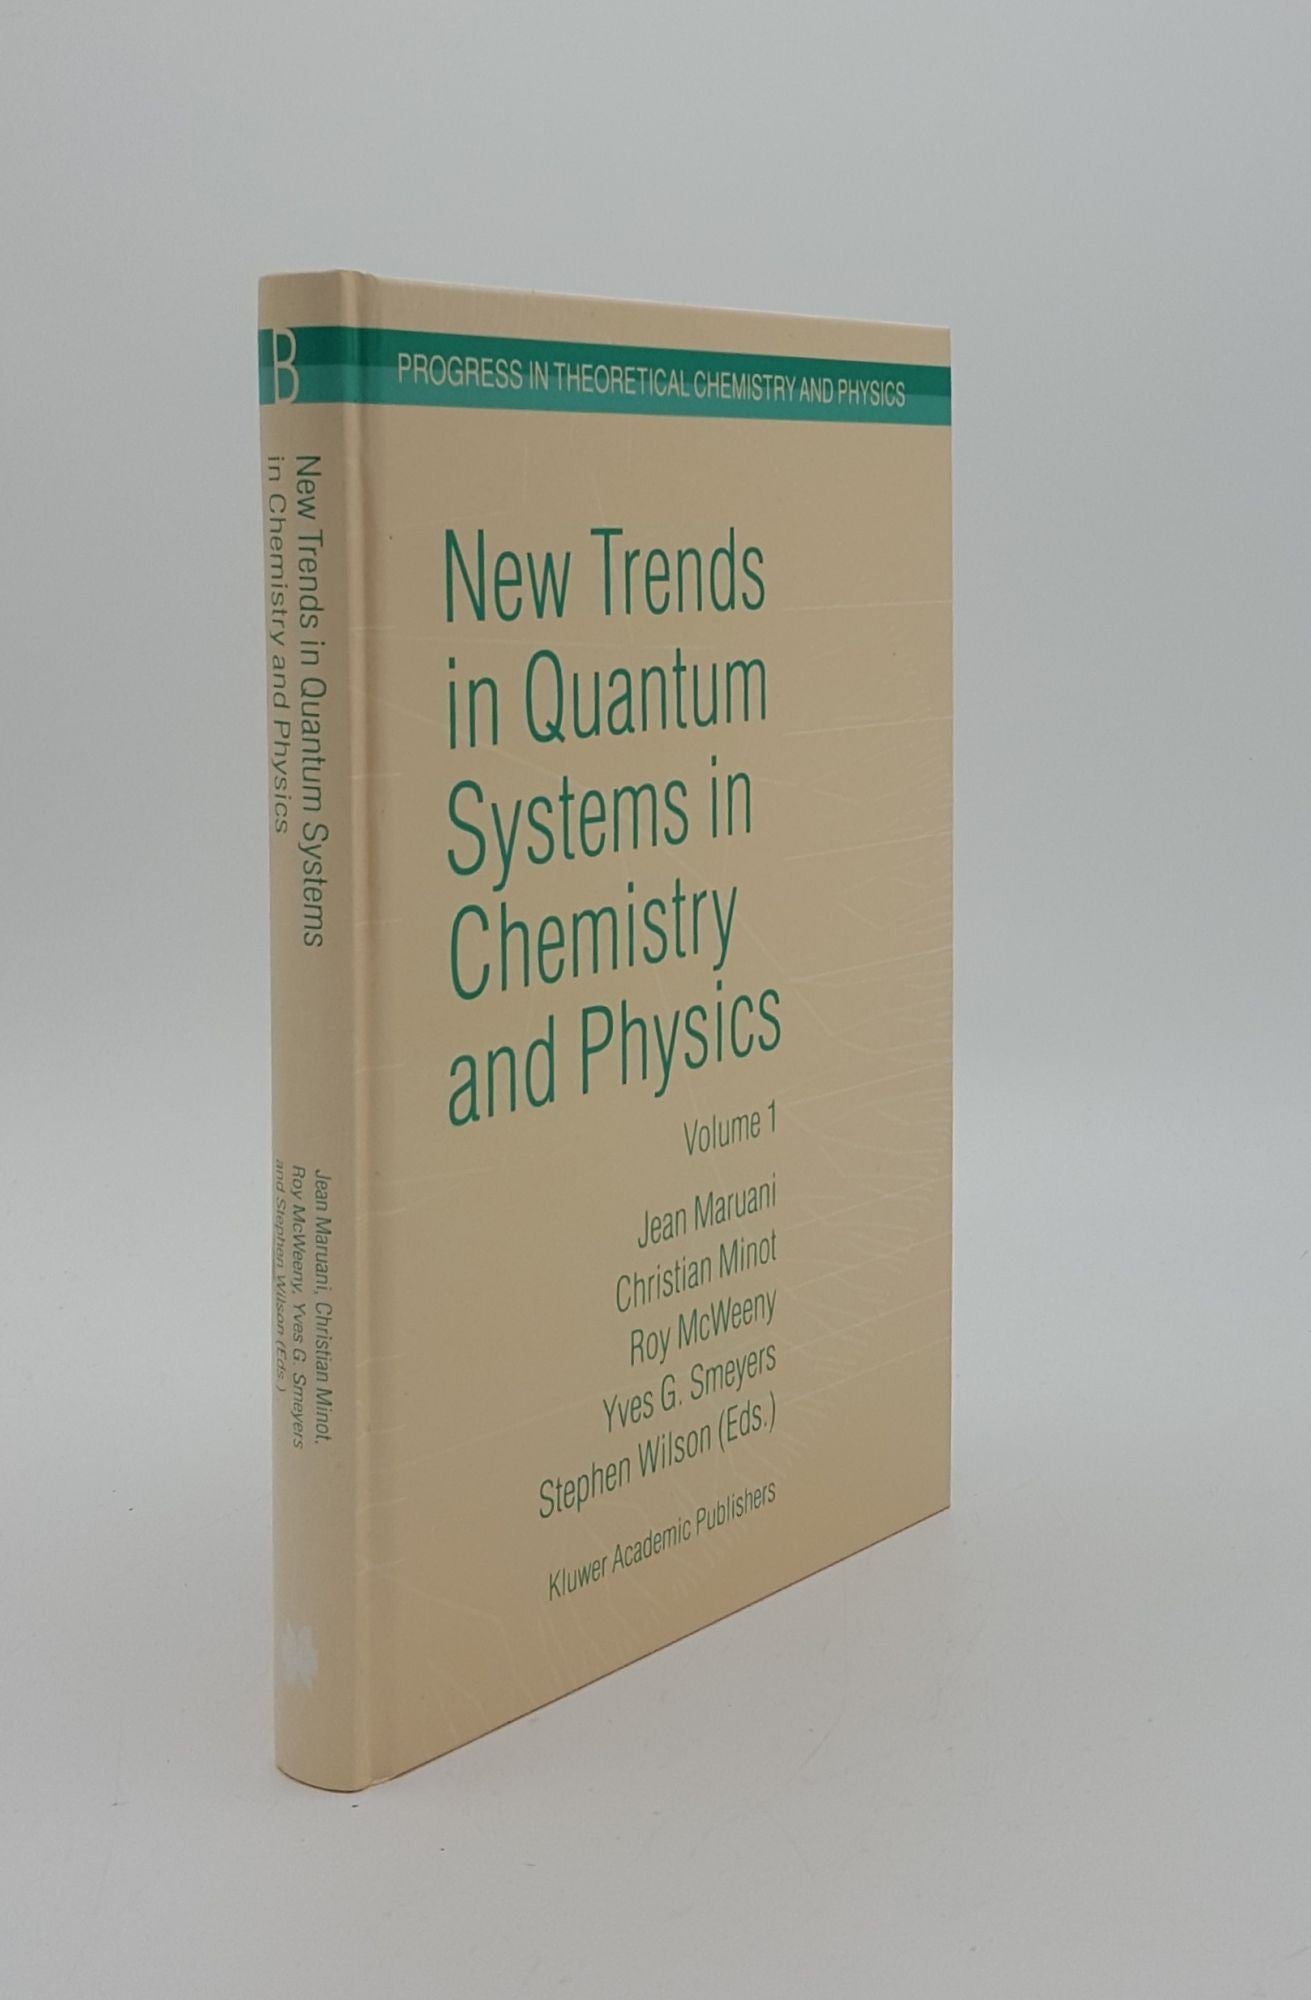 MARUANI Jean, MINOT Christian, MCWEENY Roy, WILSON Stephen, SMEYERS Yves G. - New Trends in Quantum Systems in Chemistry and Physics Volume 1 Basic Problems and Model Systems (Progress in Theoretical Chemistry & Physics)